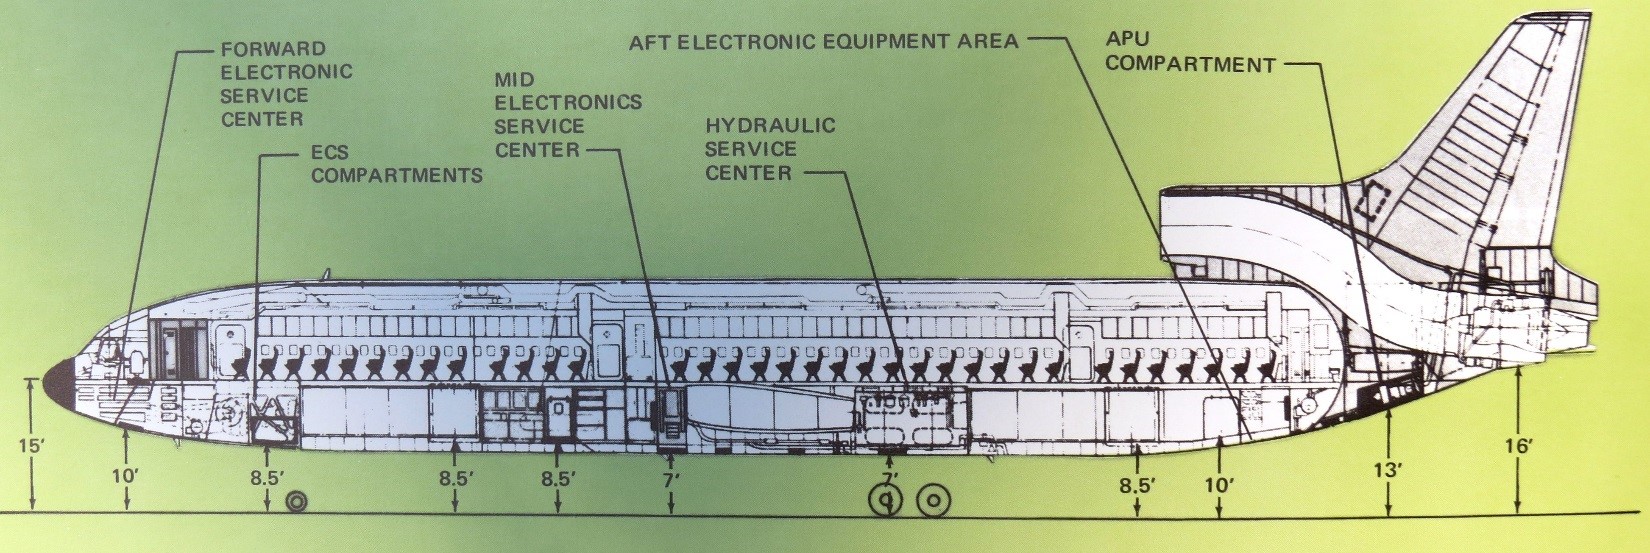 Aircraft-System-Compartment-Diagram.jpg